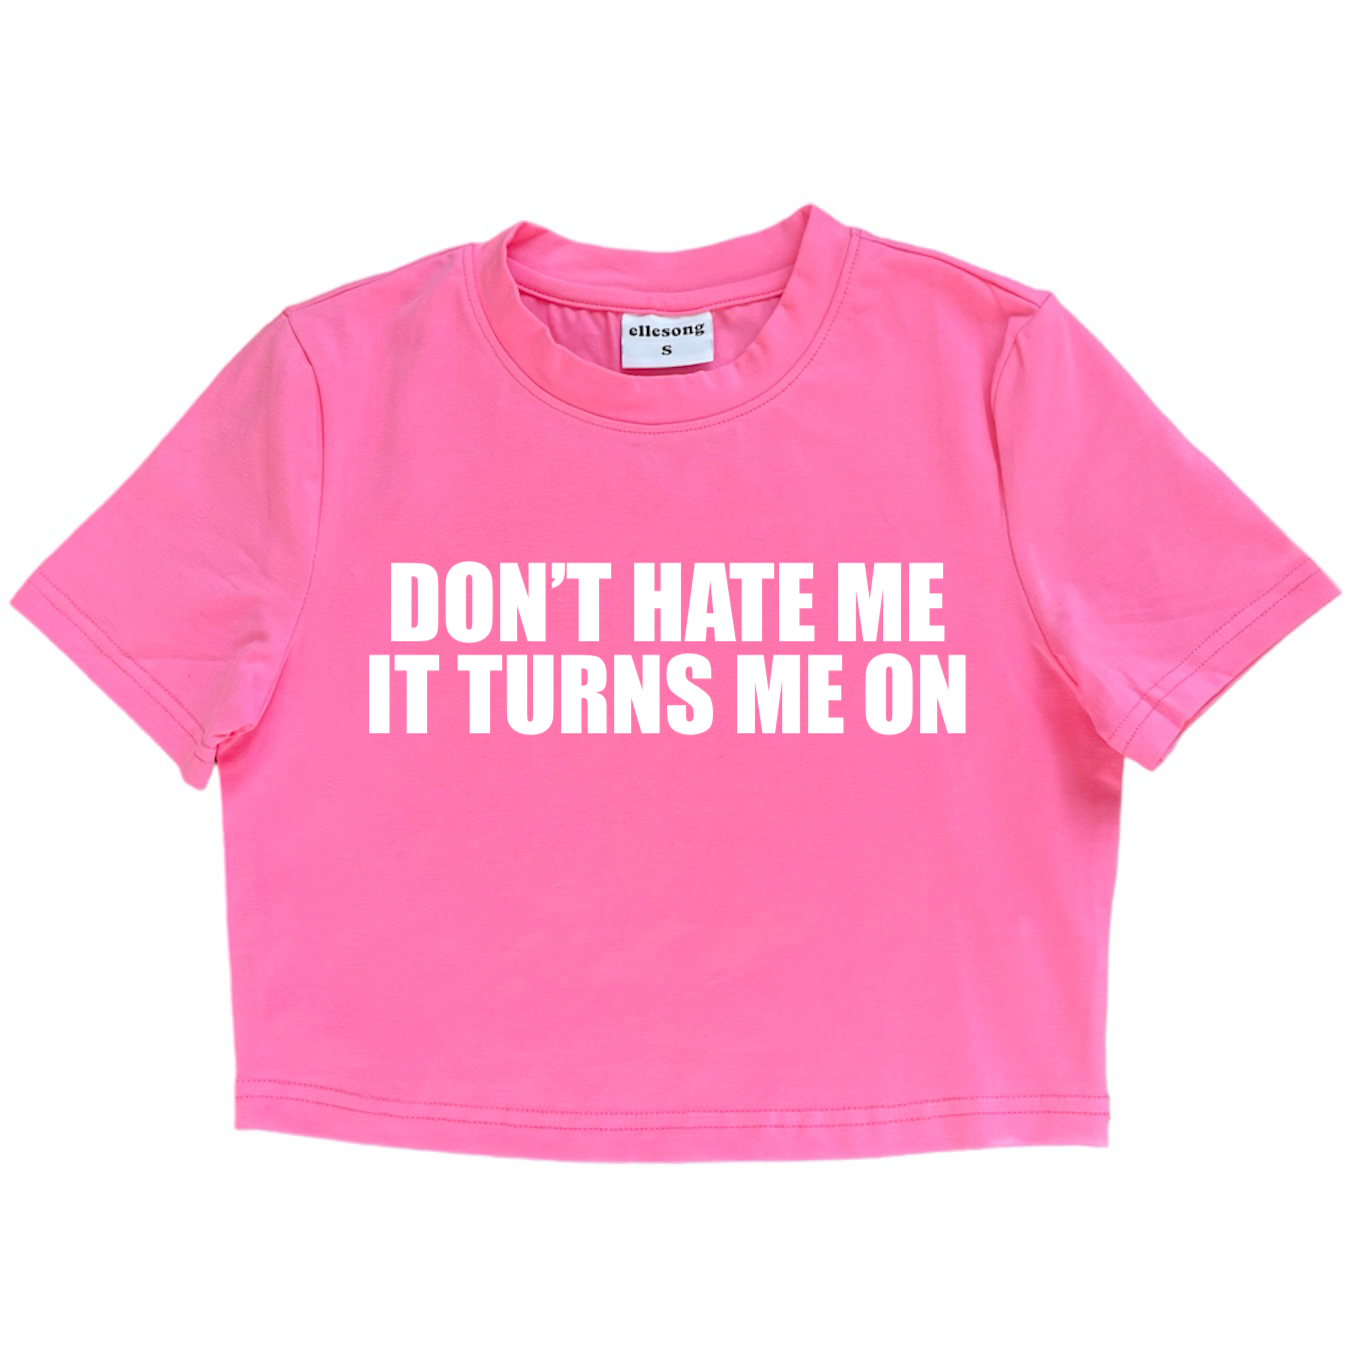 Don’t Hate Me It Turns Me On Baby Tee